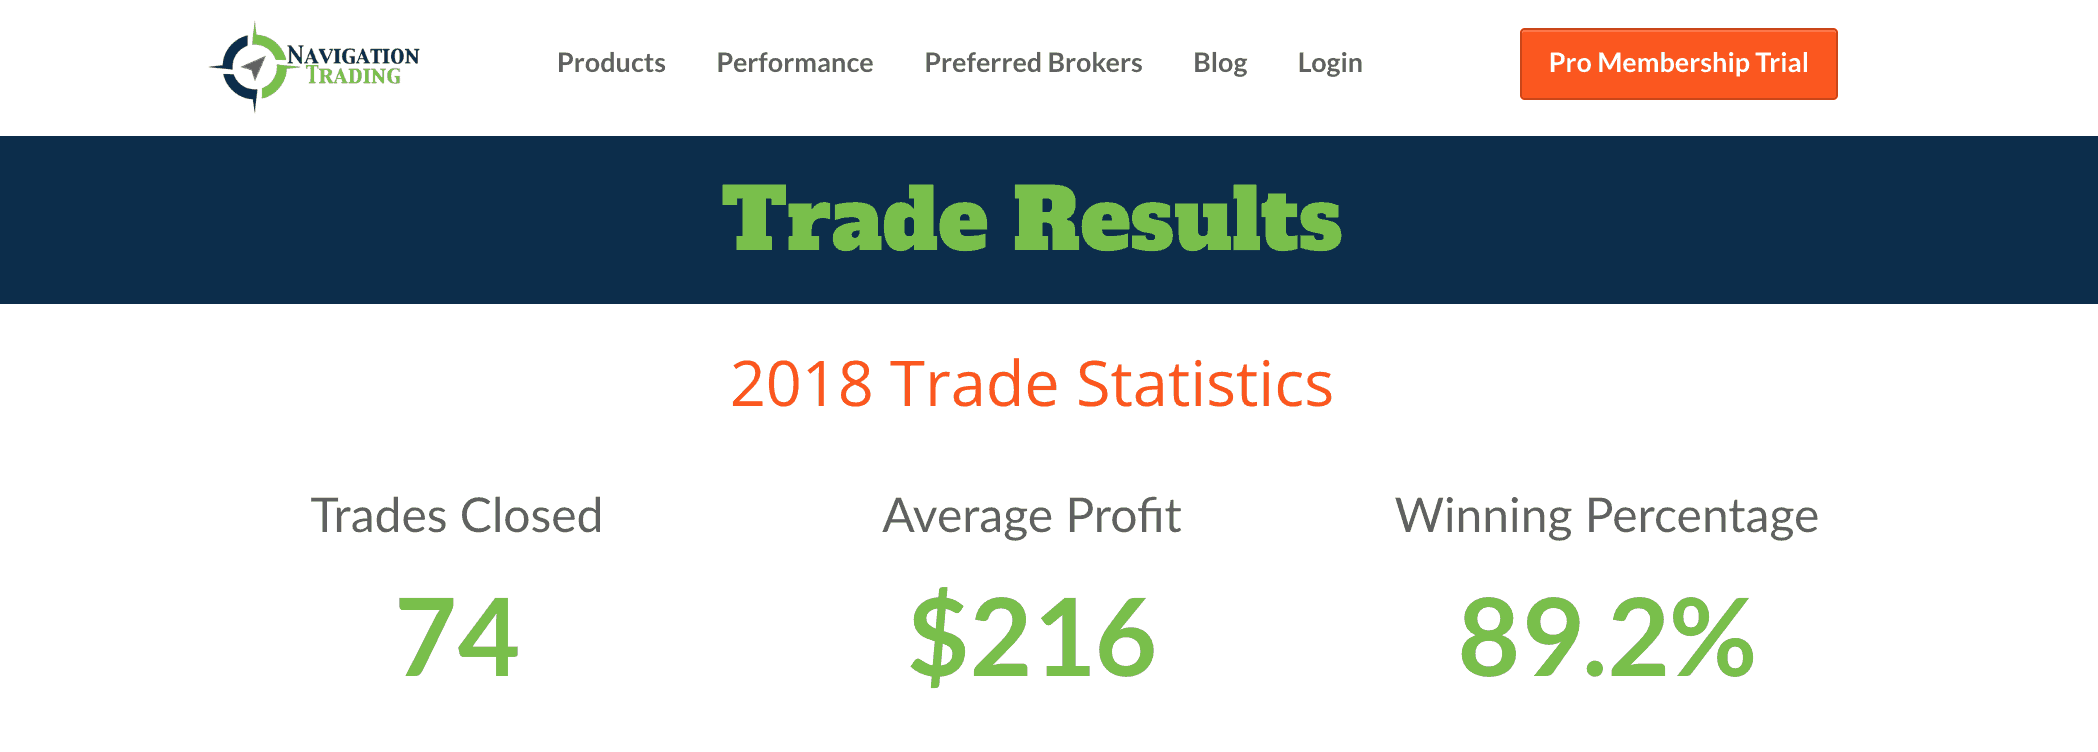 Overall Trade Results For 2018